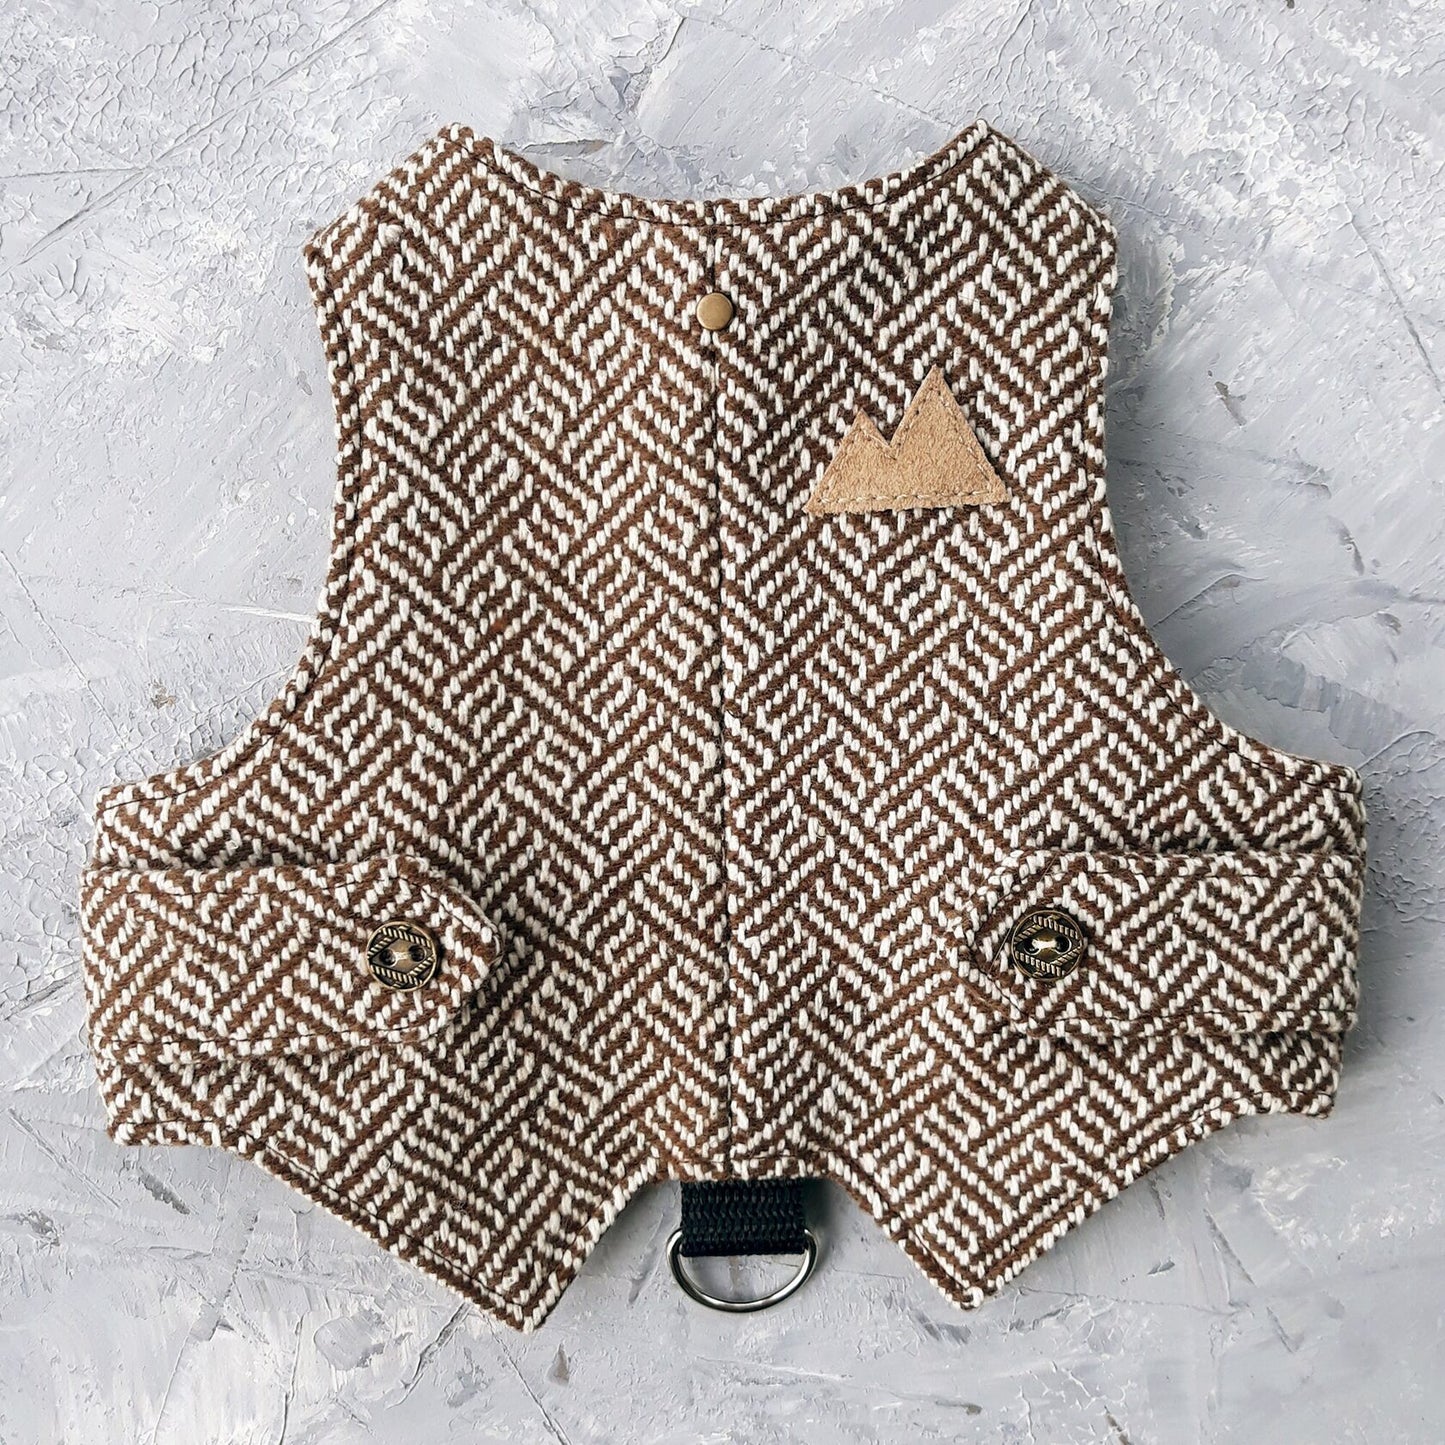 Difficult to escape tweed cat harness with geometric pattern